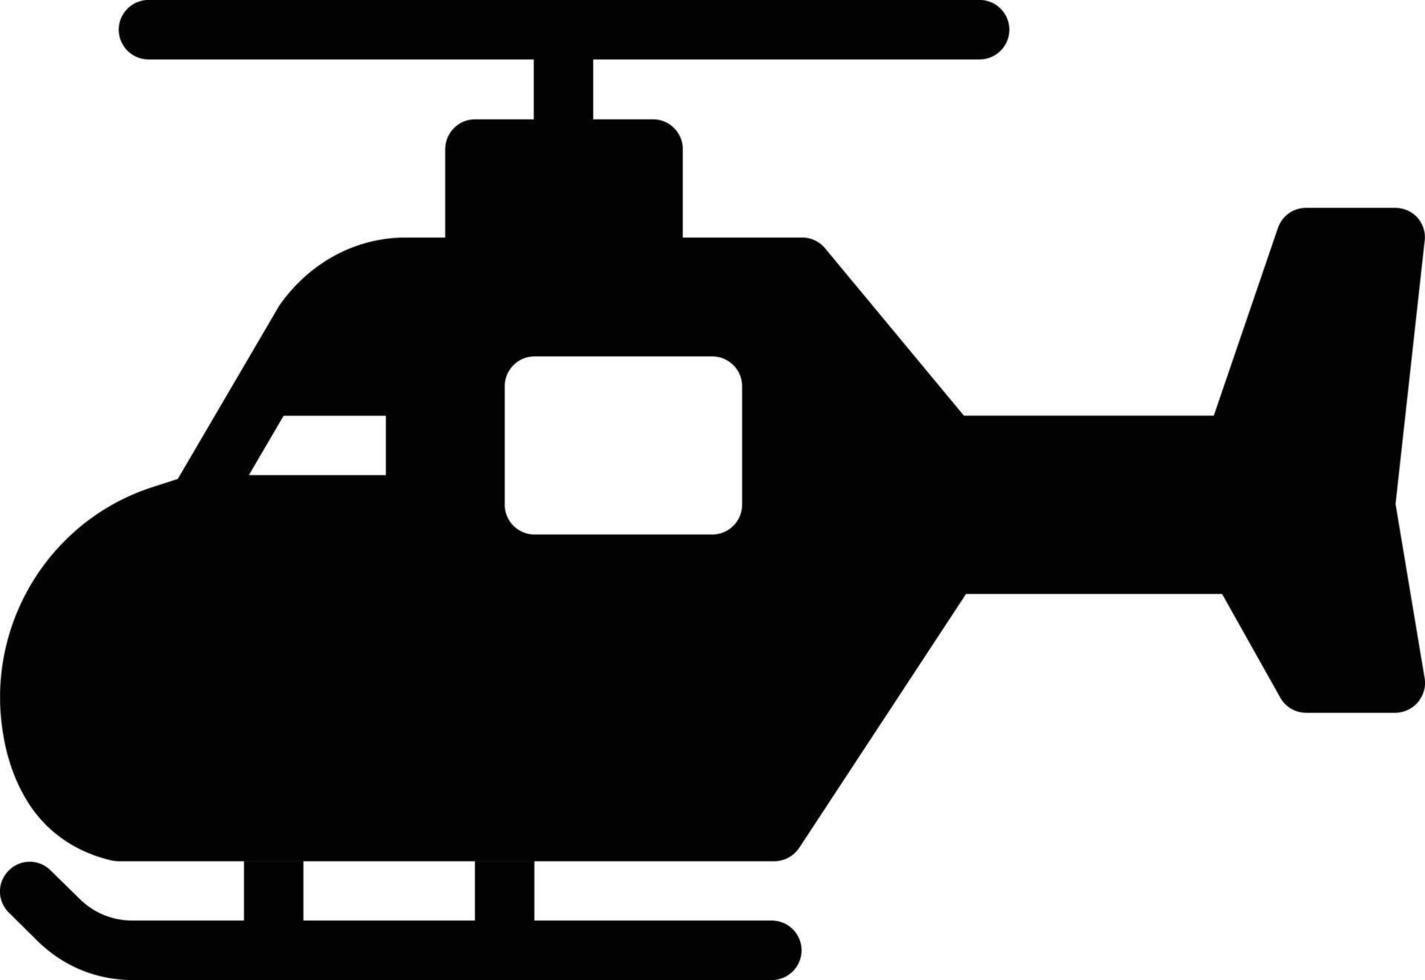 chopper vector illustration on a background.Premium quality symbols. vector icons for concept and graphic design.